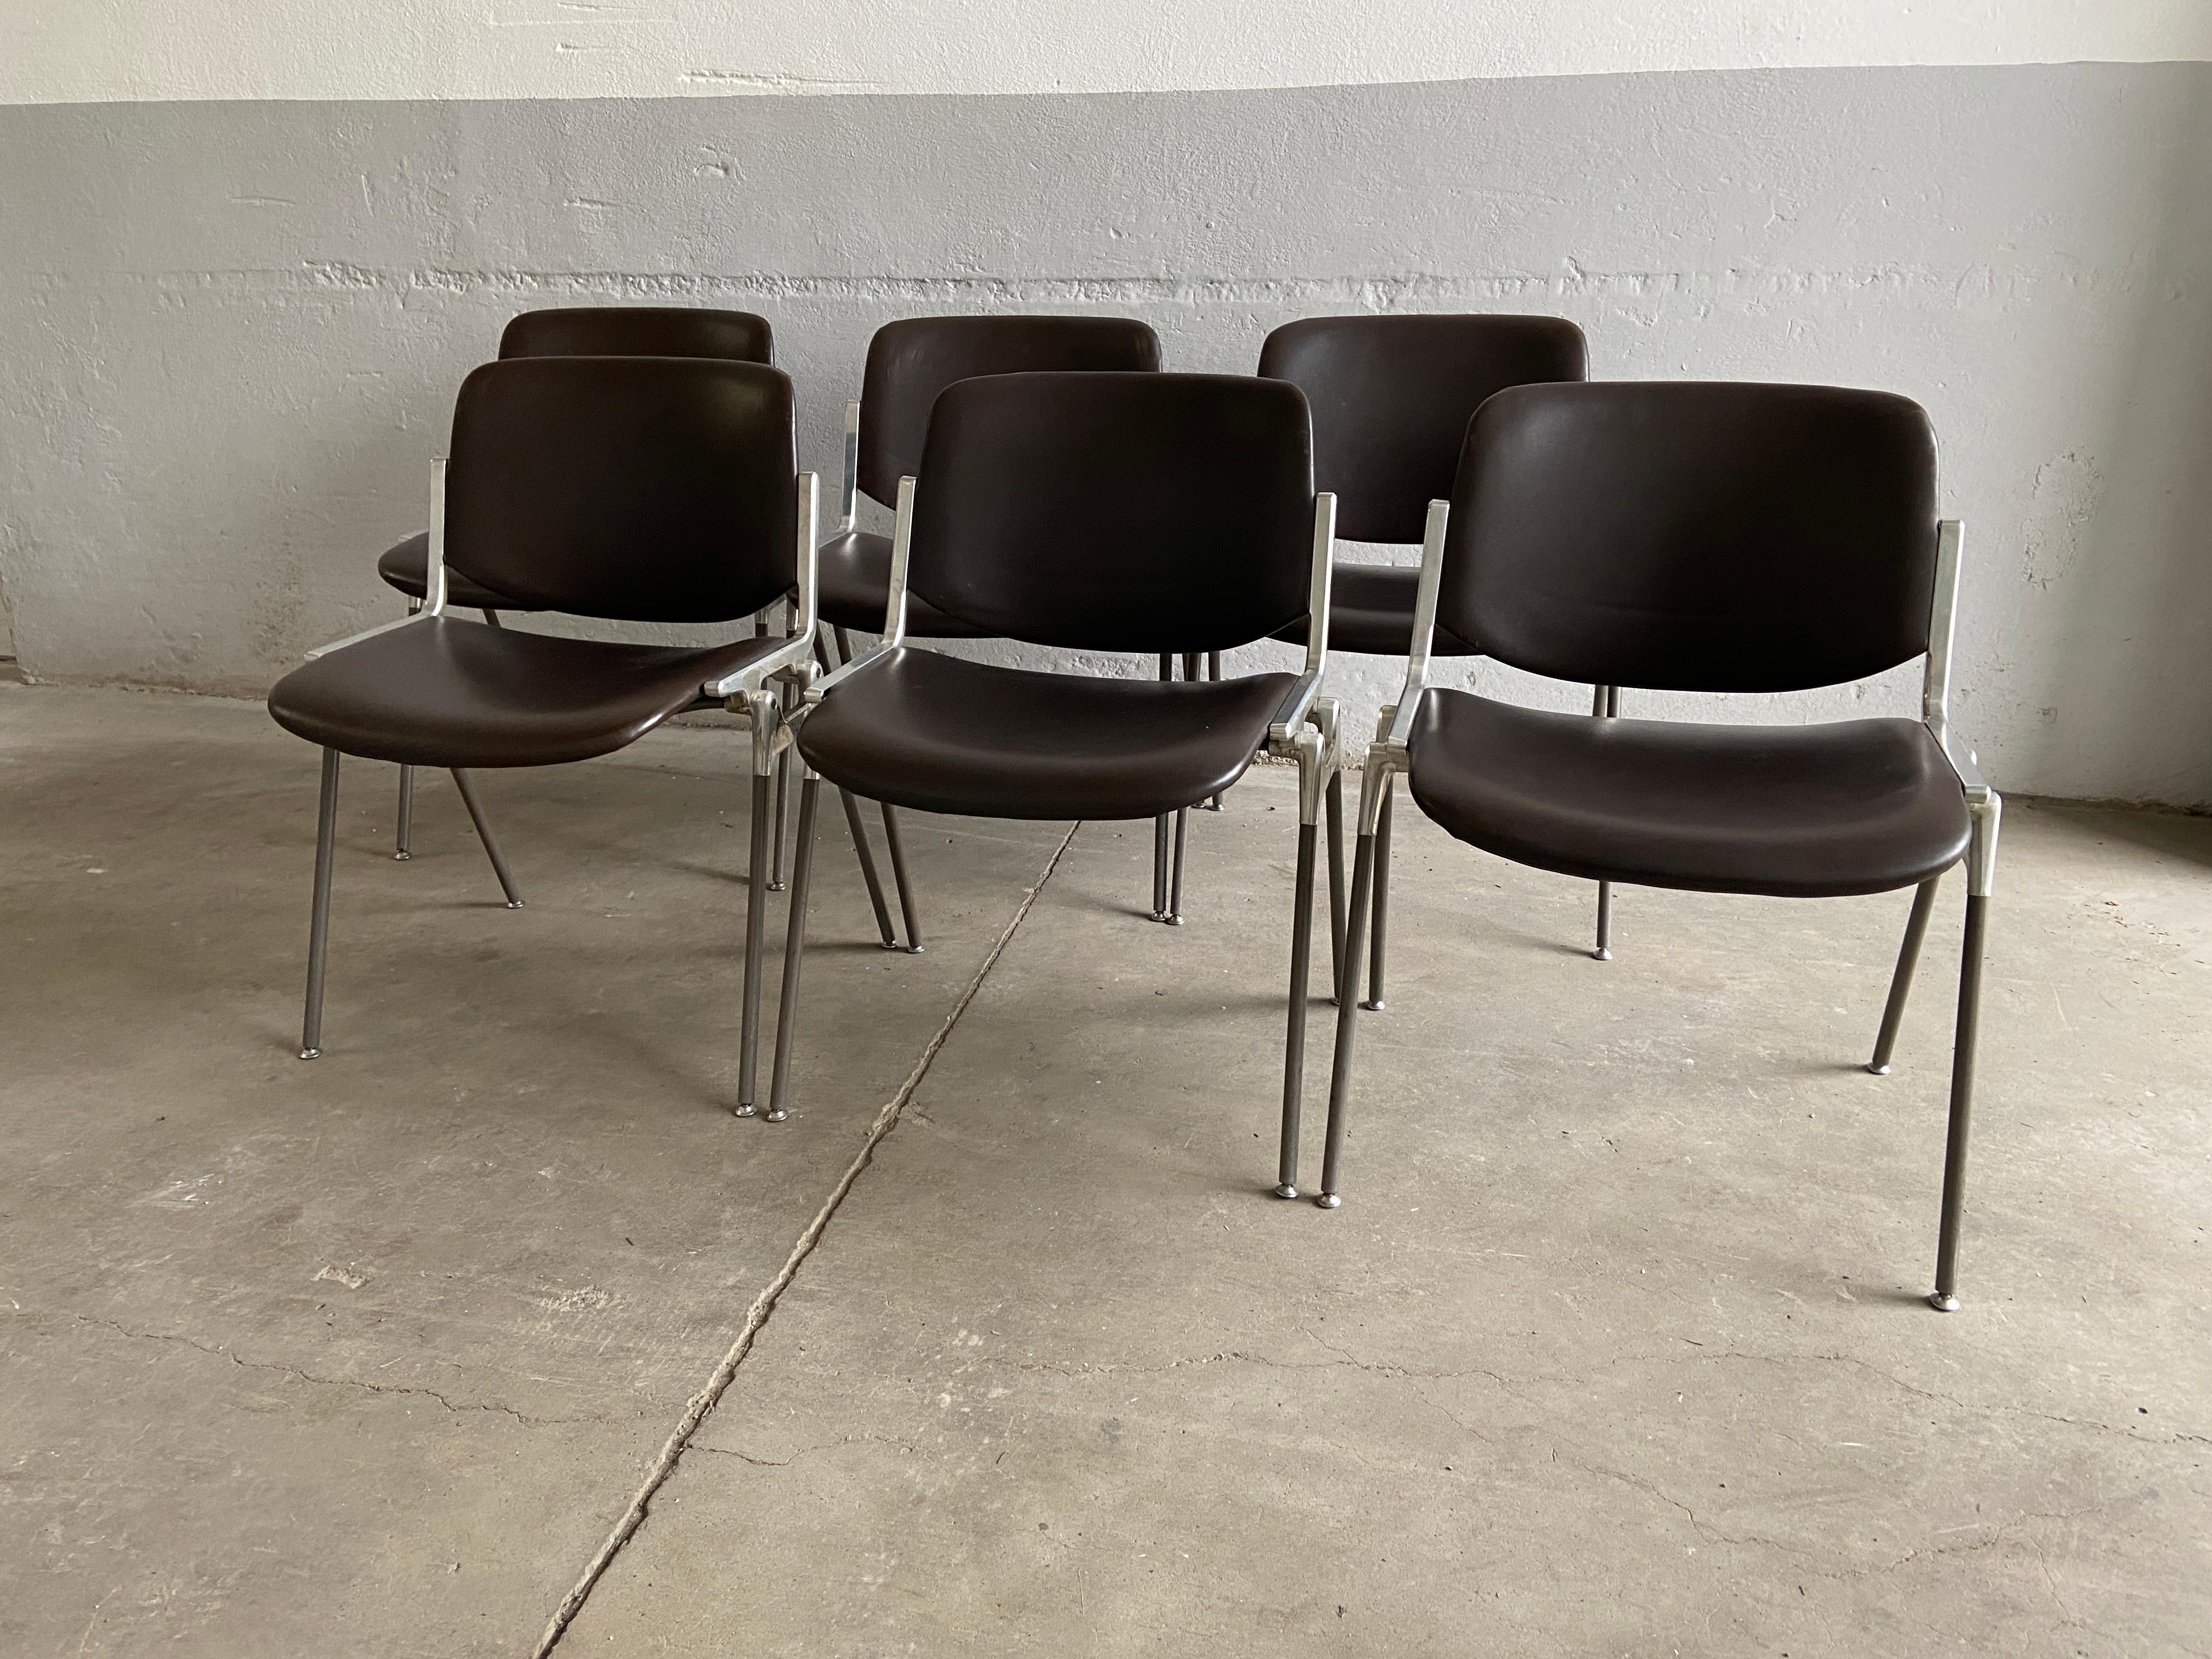 Mid-Century Modern set of 6 cast aluminum stackable chairs with dark brown faux leather upholstery by Giancarlo Piretti for Castelli, 1960s.